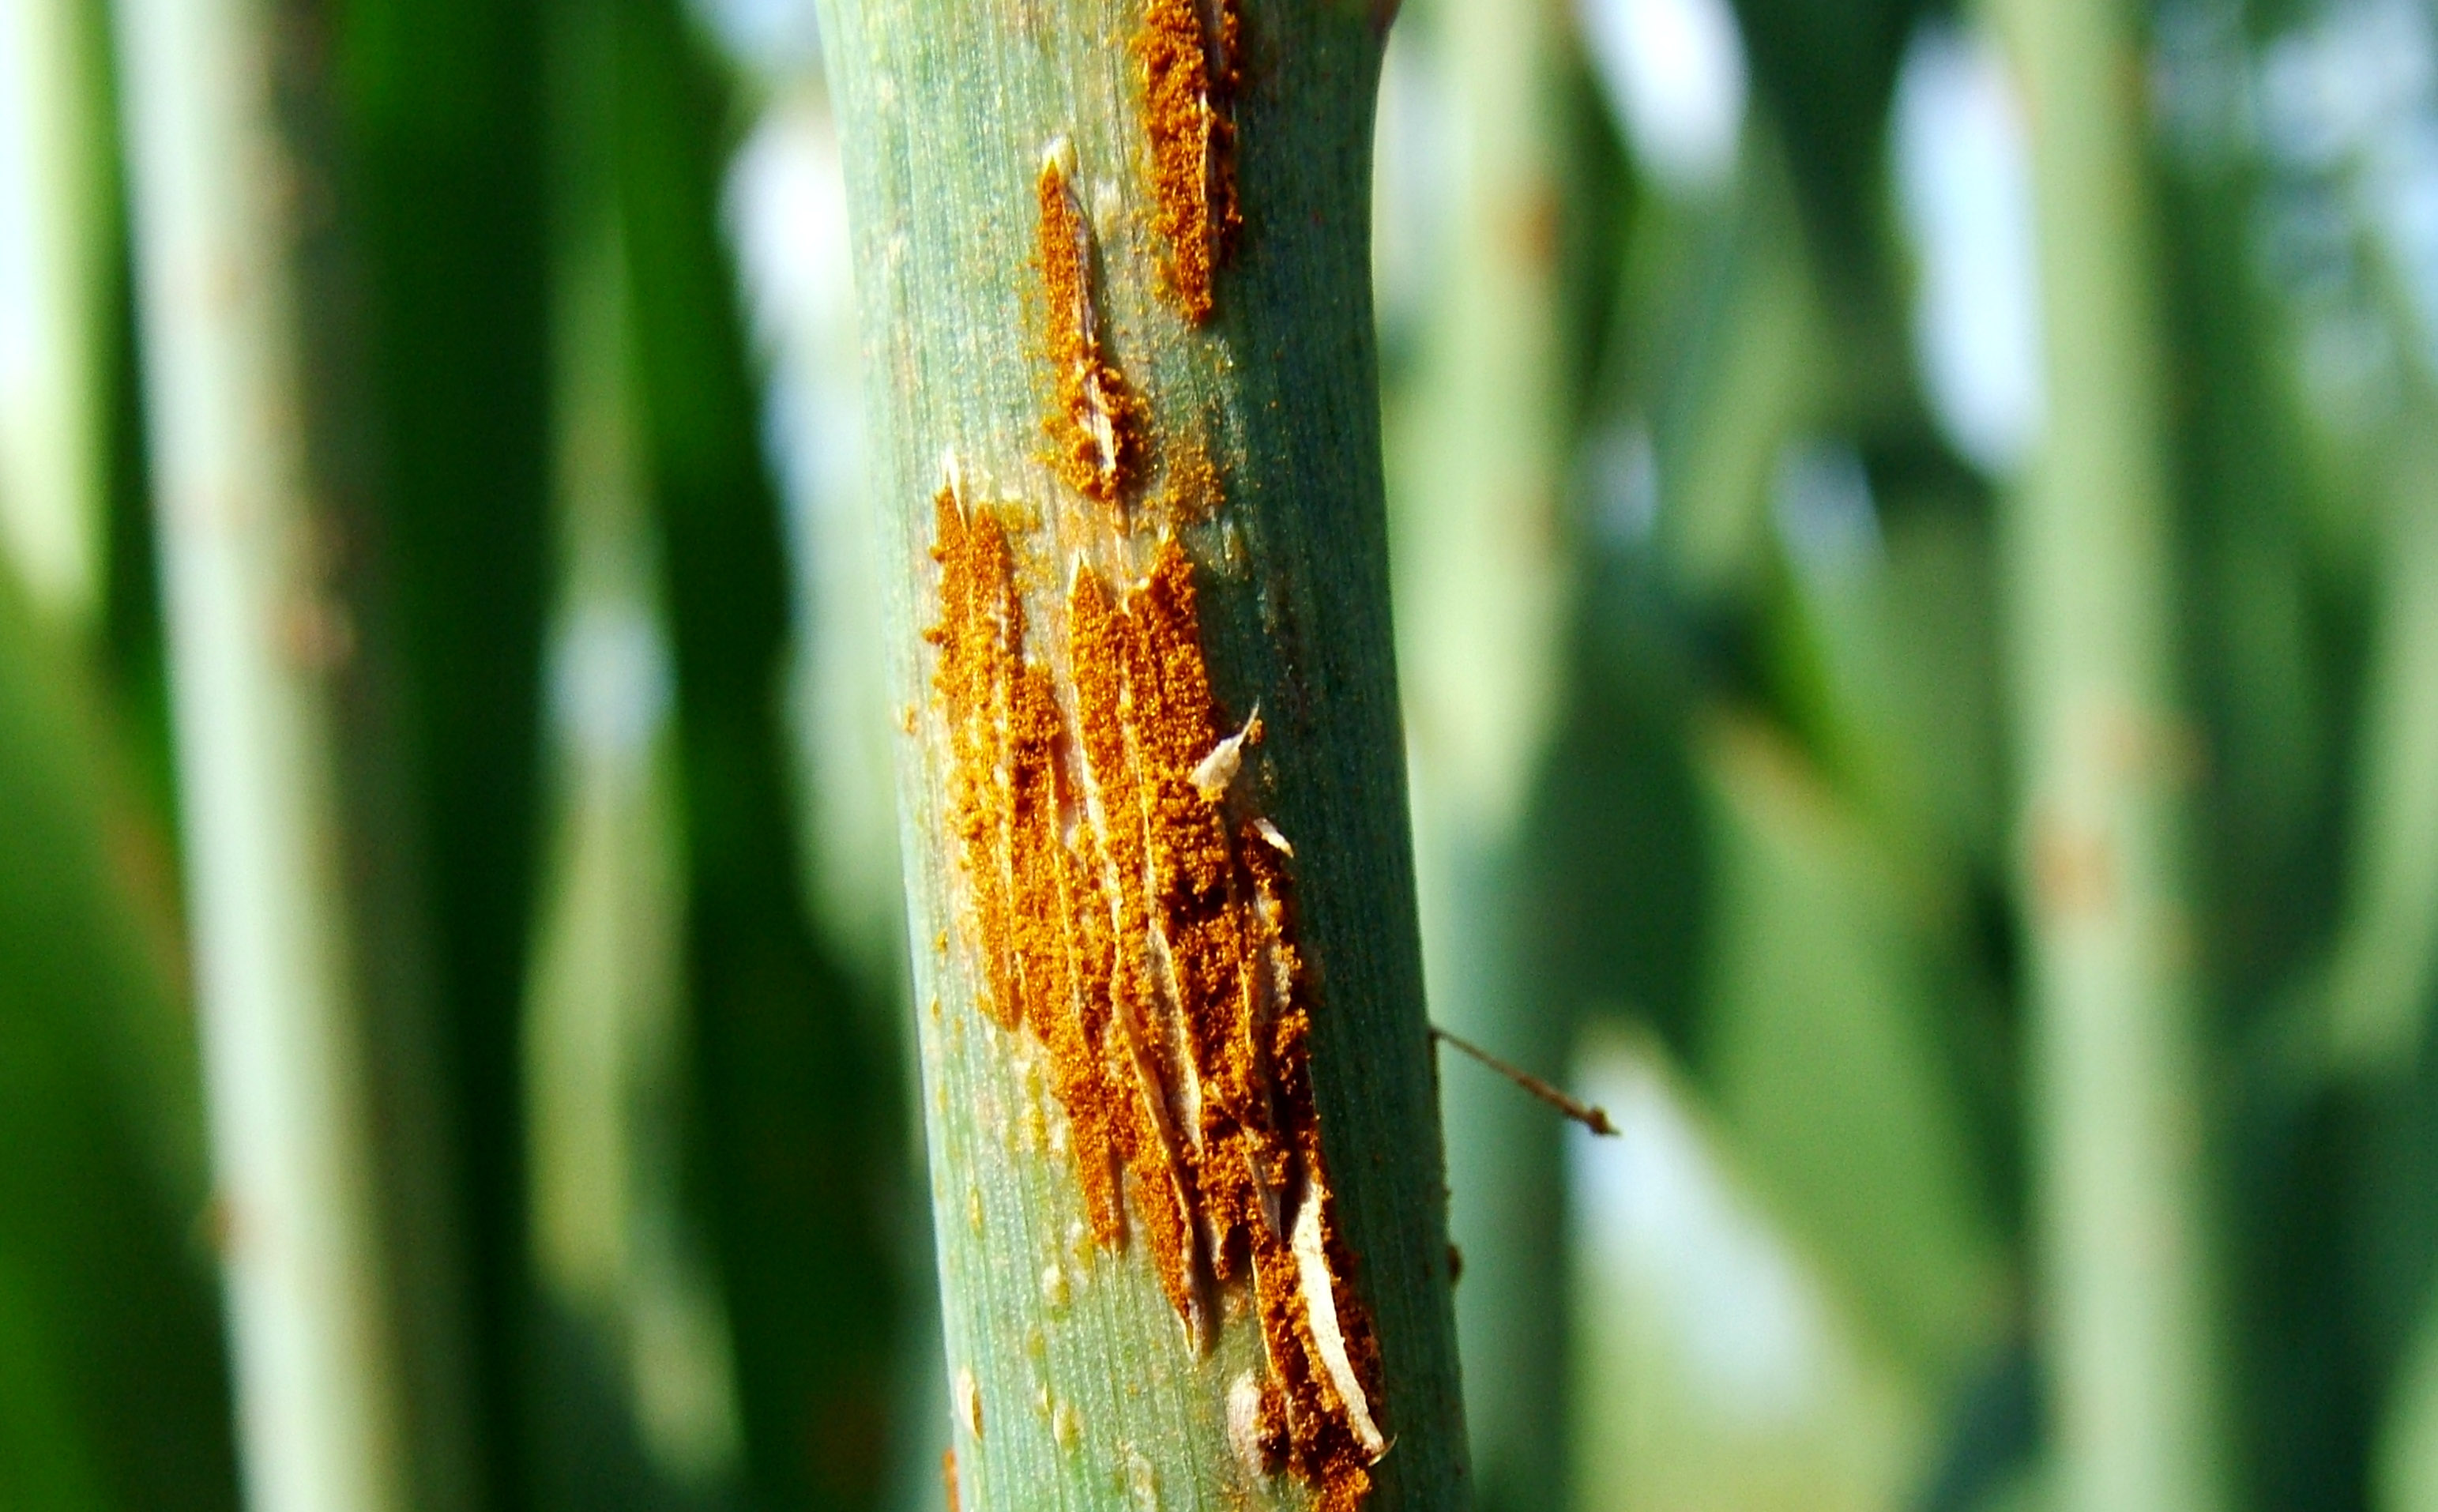 Stem rust damage on oat stem. Details in text following the image.